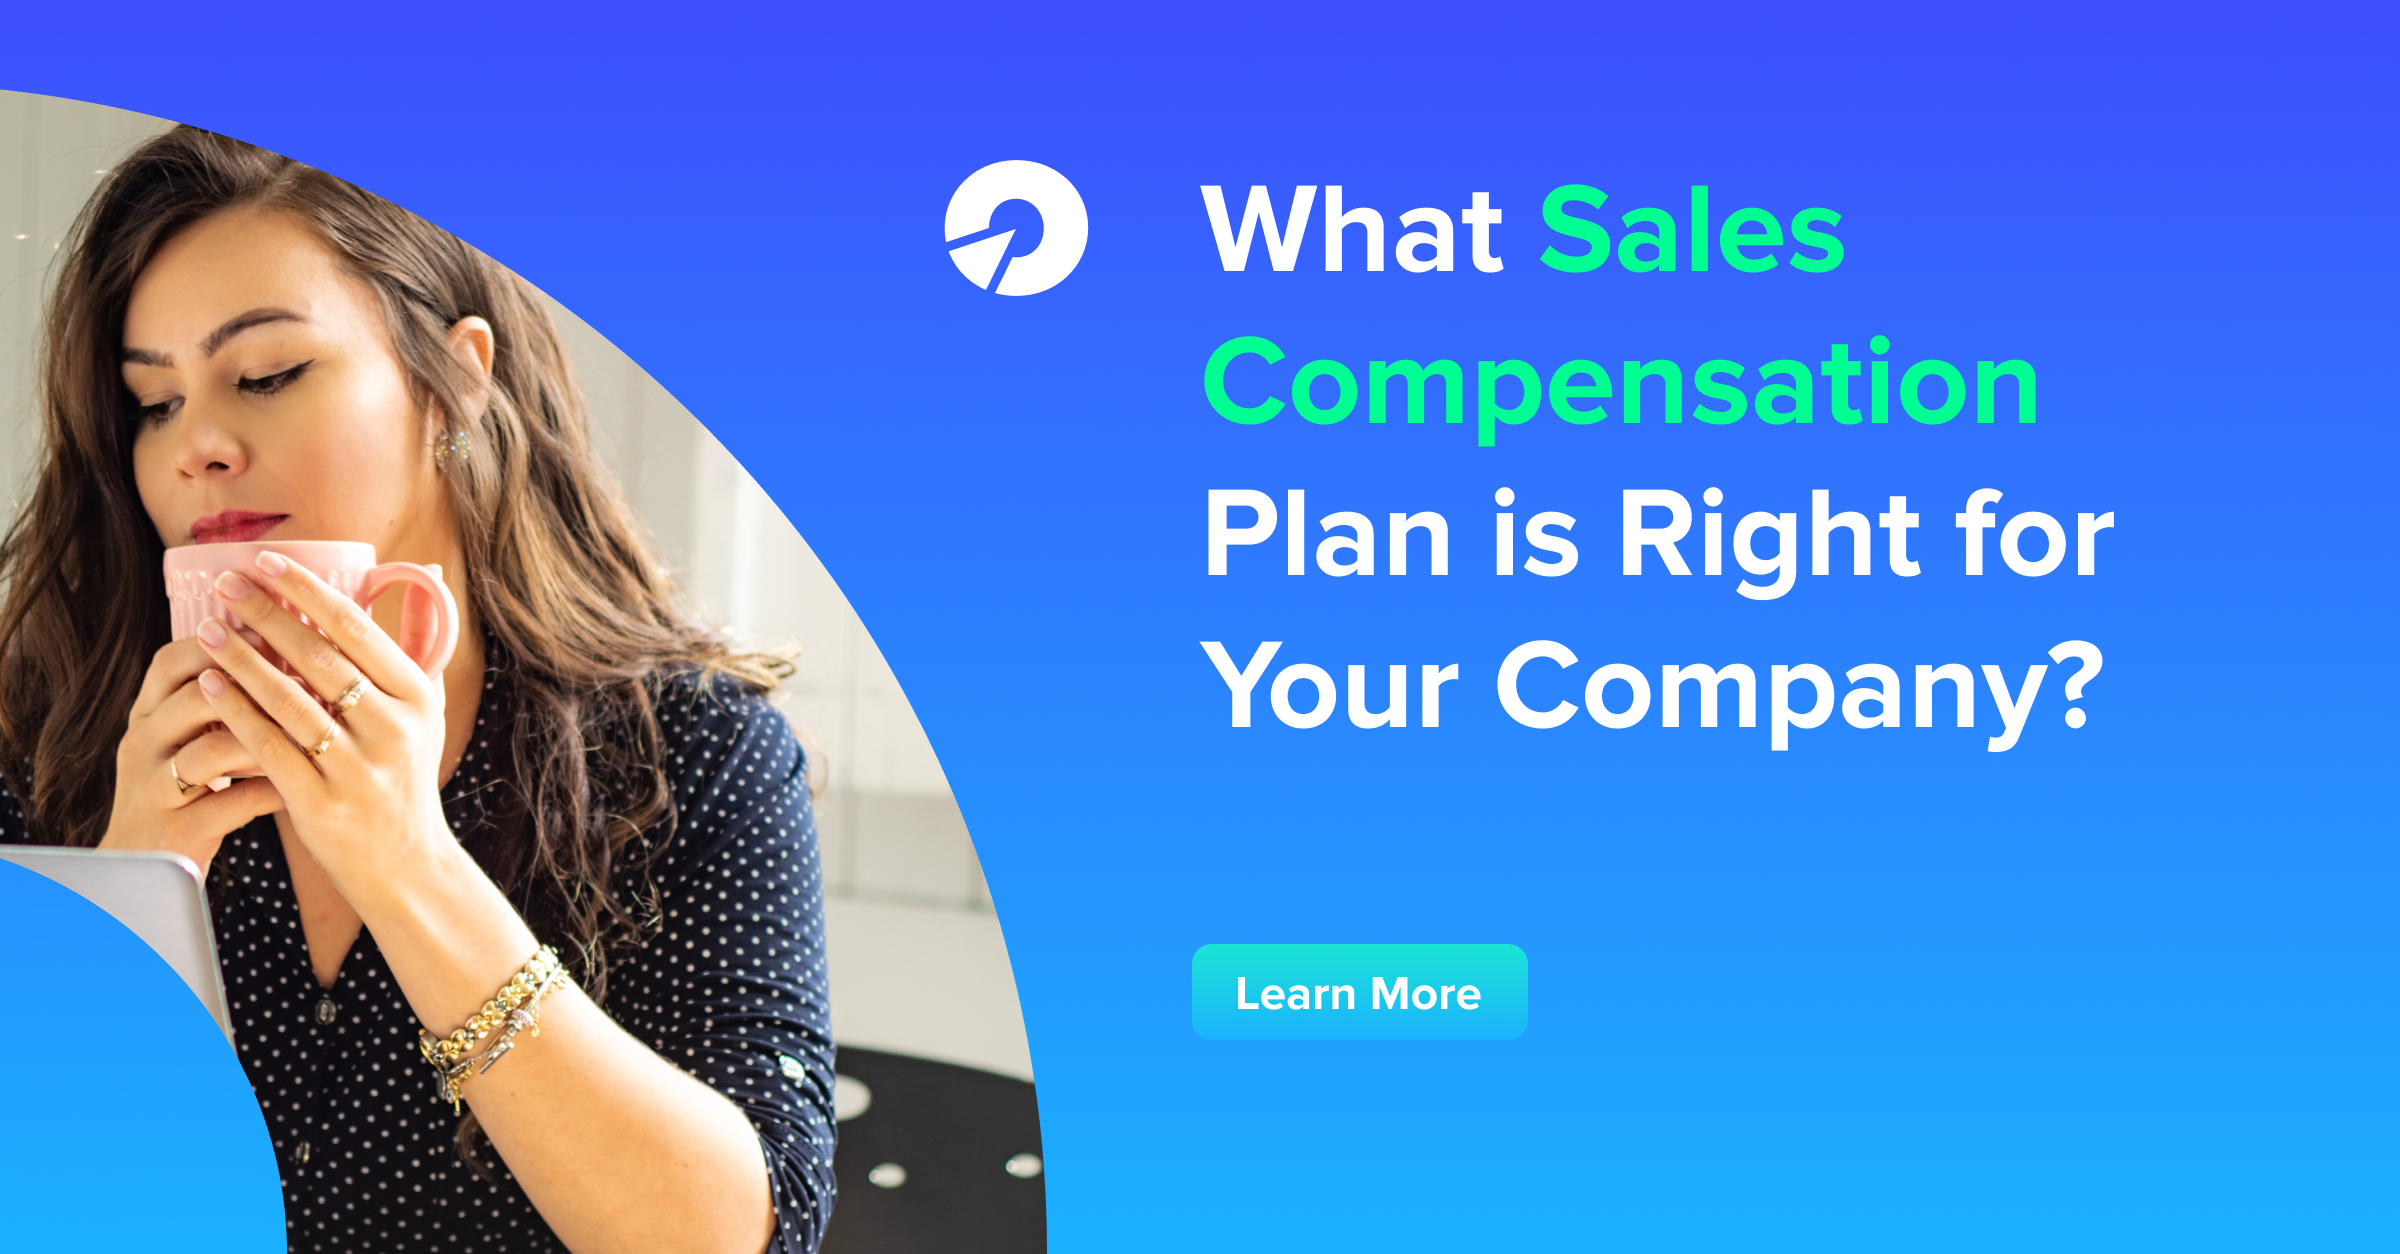 What Sales Compensation Plan is Right for Your Company?